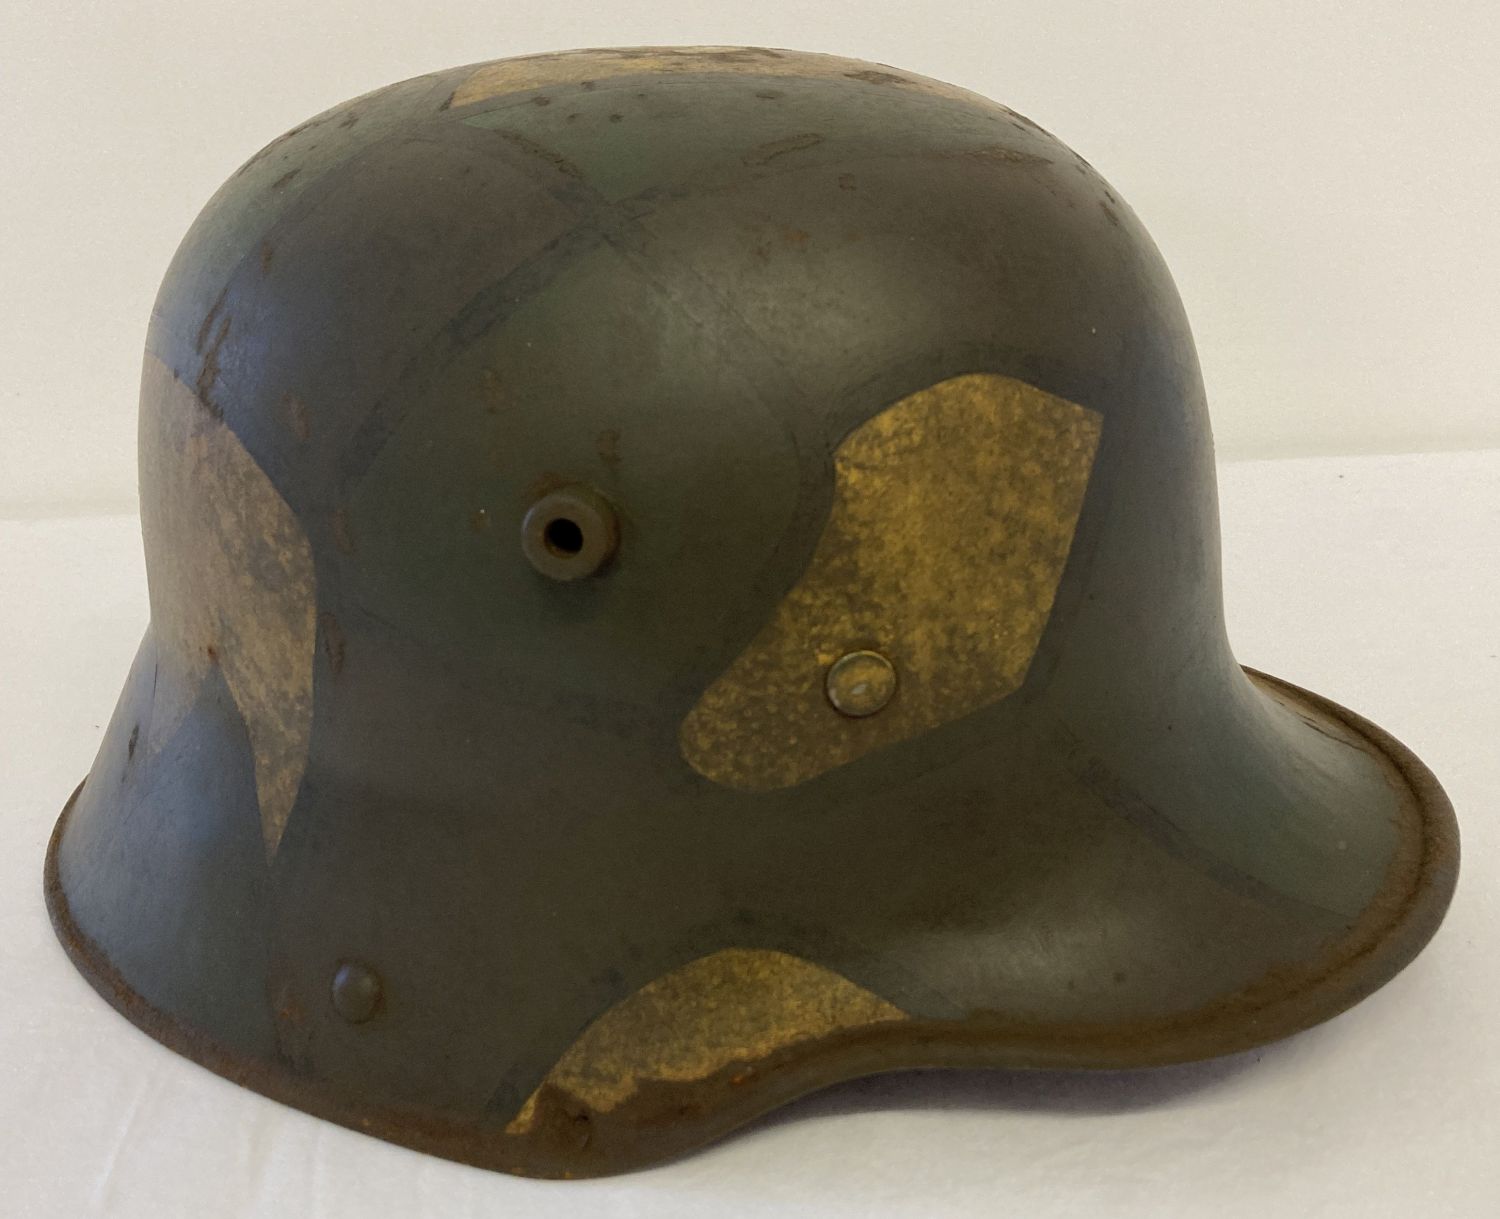 A German WWI style M16 stalhelm helmet with painted camouflage design, complete with leather liner.